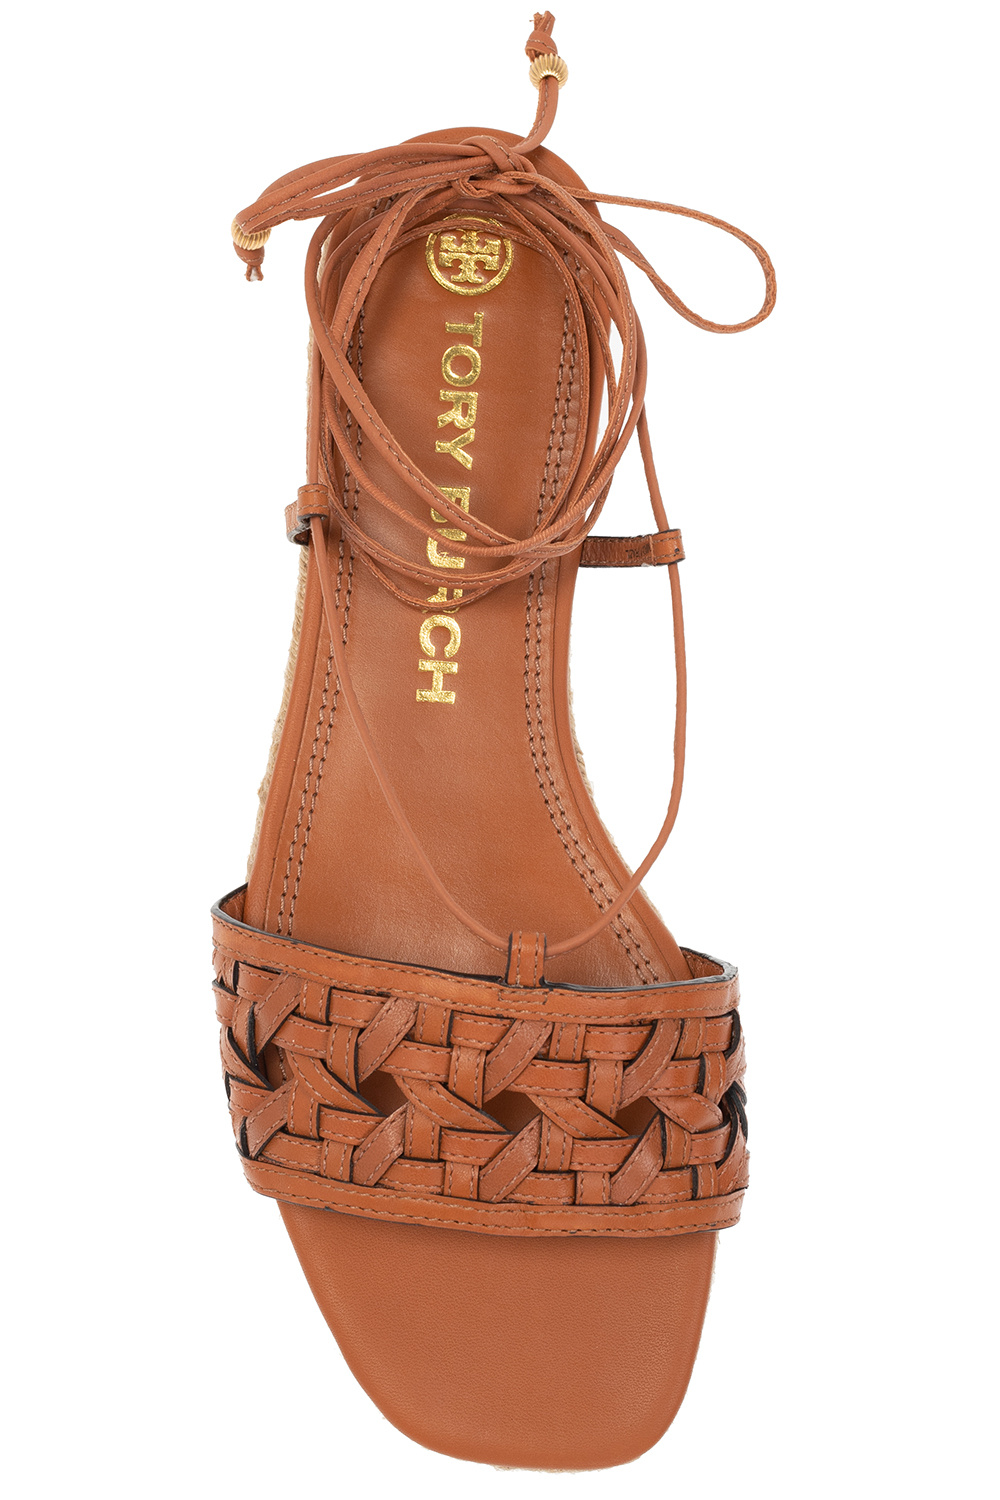 Sandals Tory Burch Brown size 7.5 US in Not specified - 26828294